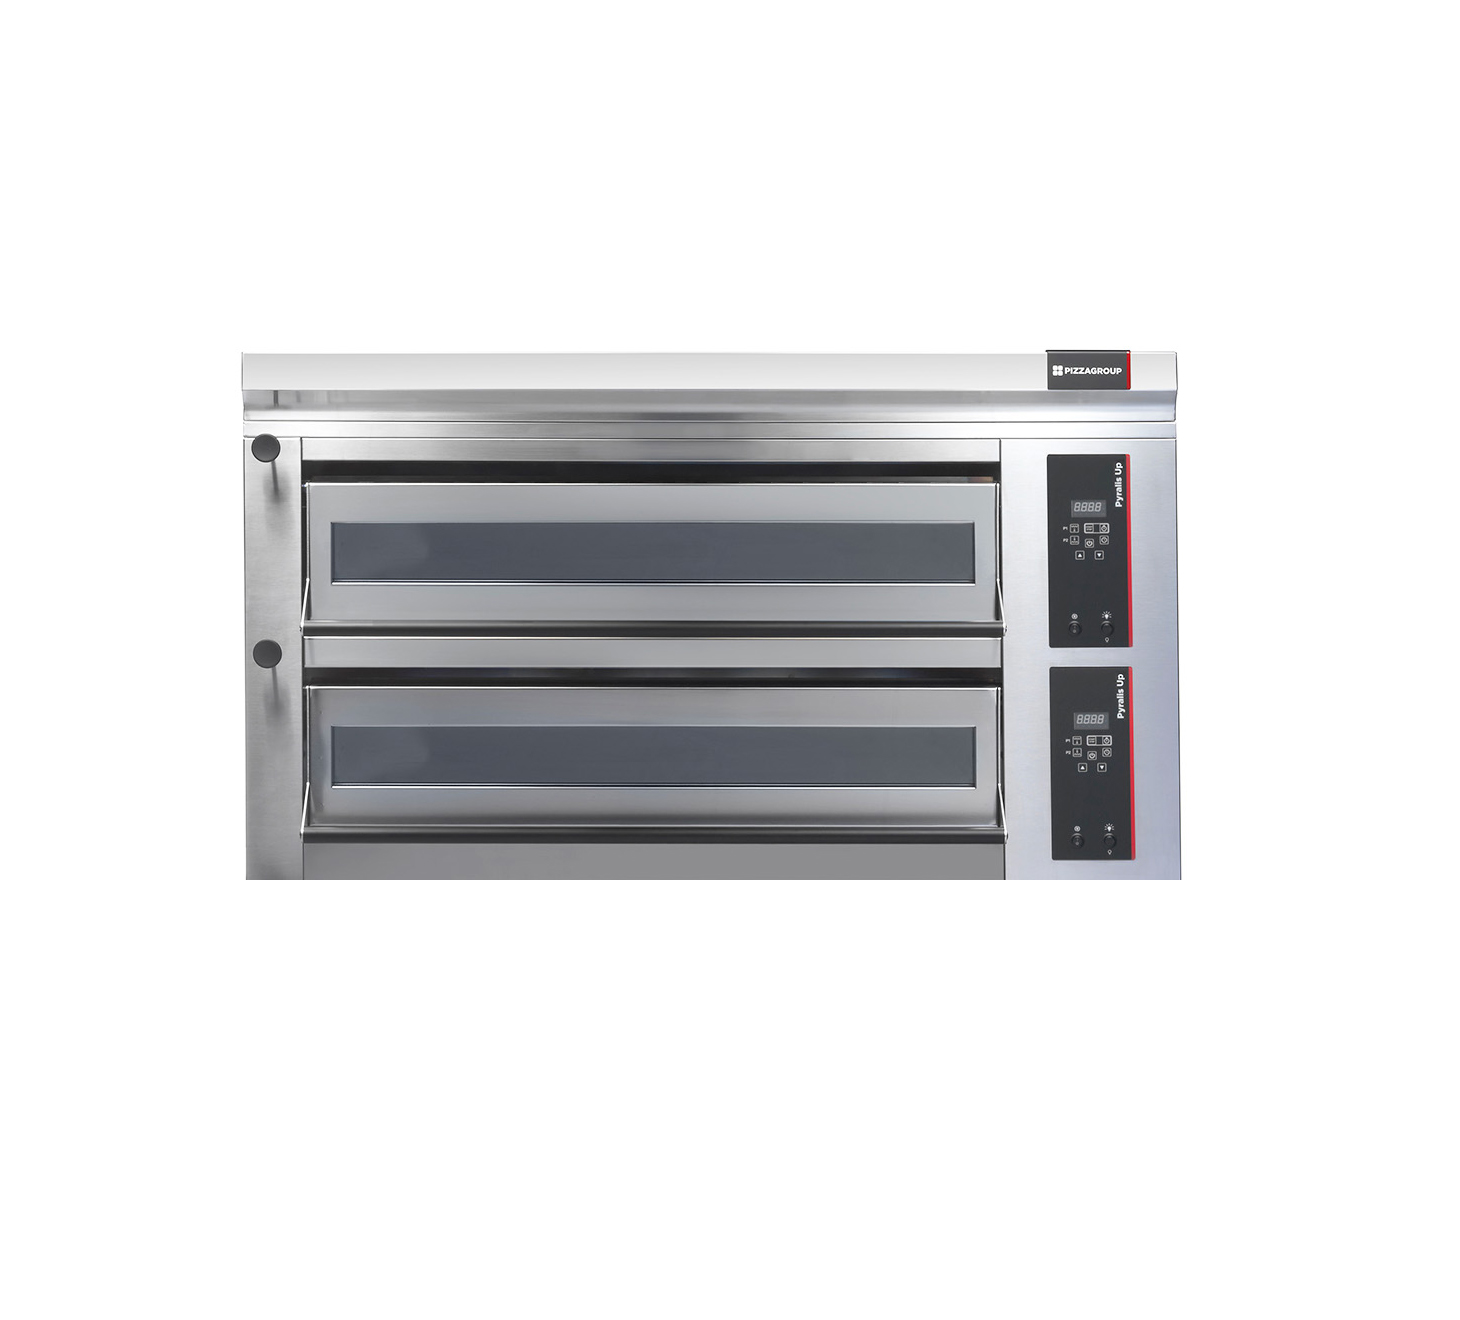 PIZZAGROUP Pyralis Up PY-UP D8 Double Deck Electric Pizza Oven